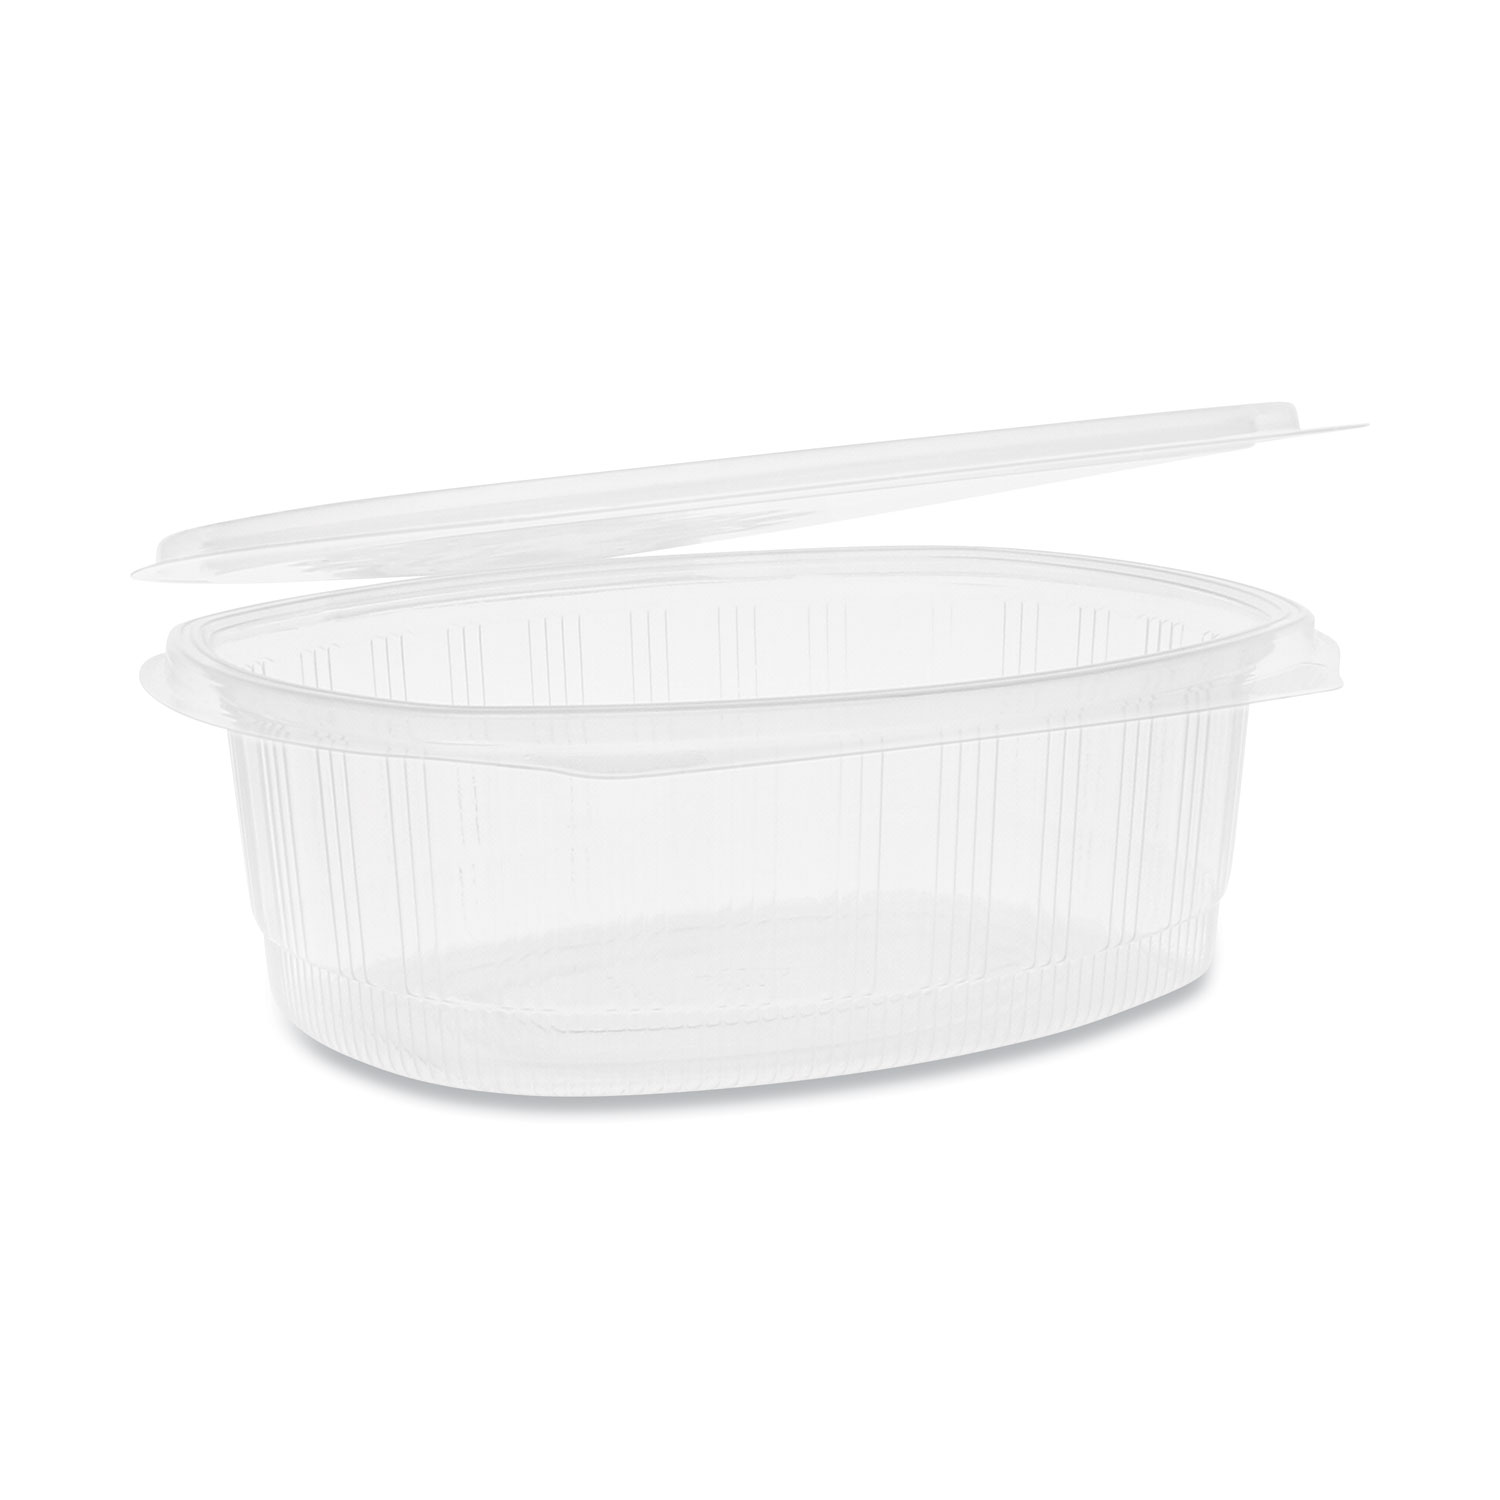  Pactiv YCA910480000 EarthChoice PET Hinged Lid Deli Containers, 8.88 x 7.25 x 2.94, 48 oz,  1-Compartment, Clear, 190/Carton (PCTYCA910480000) 